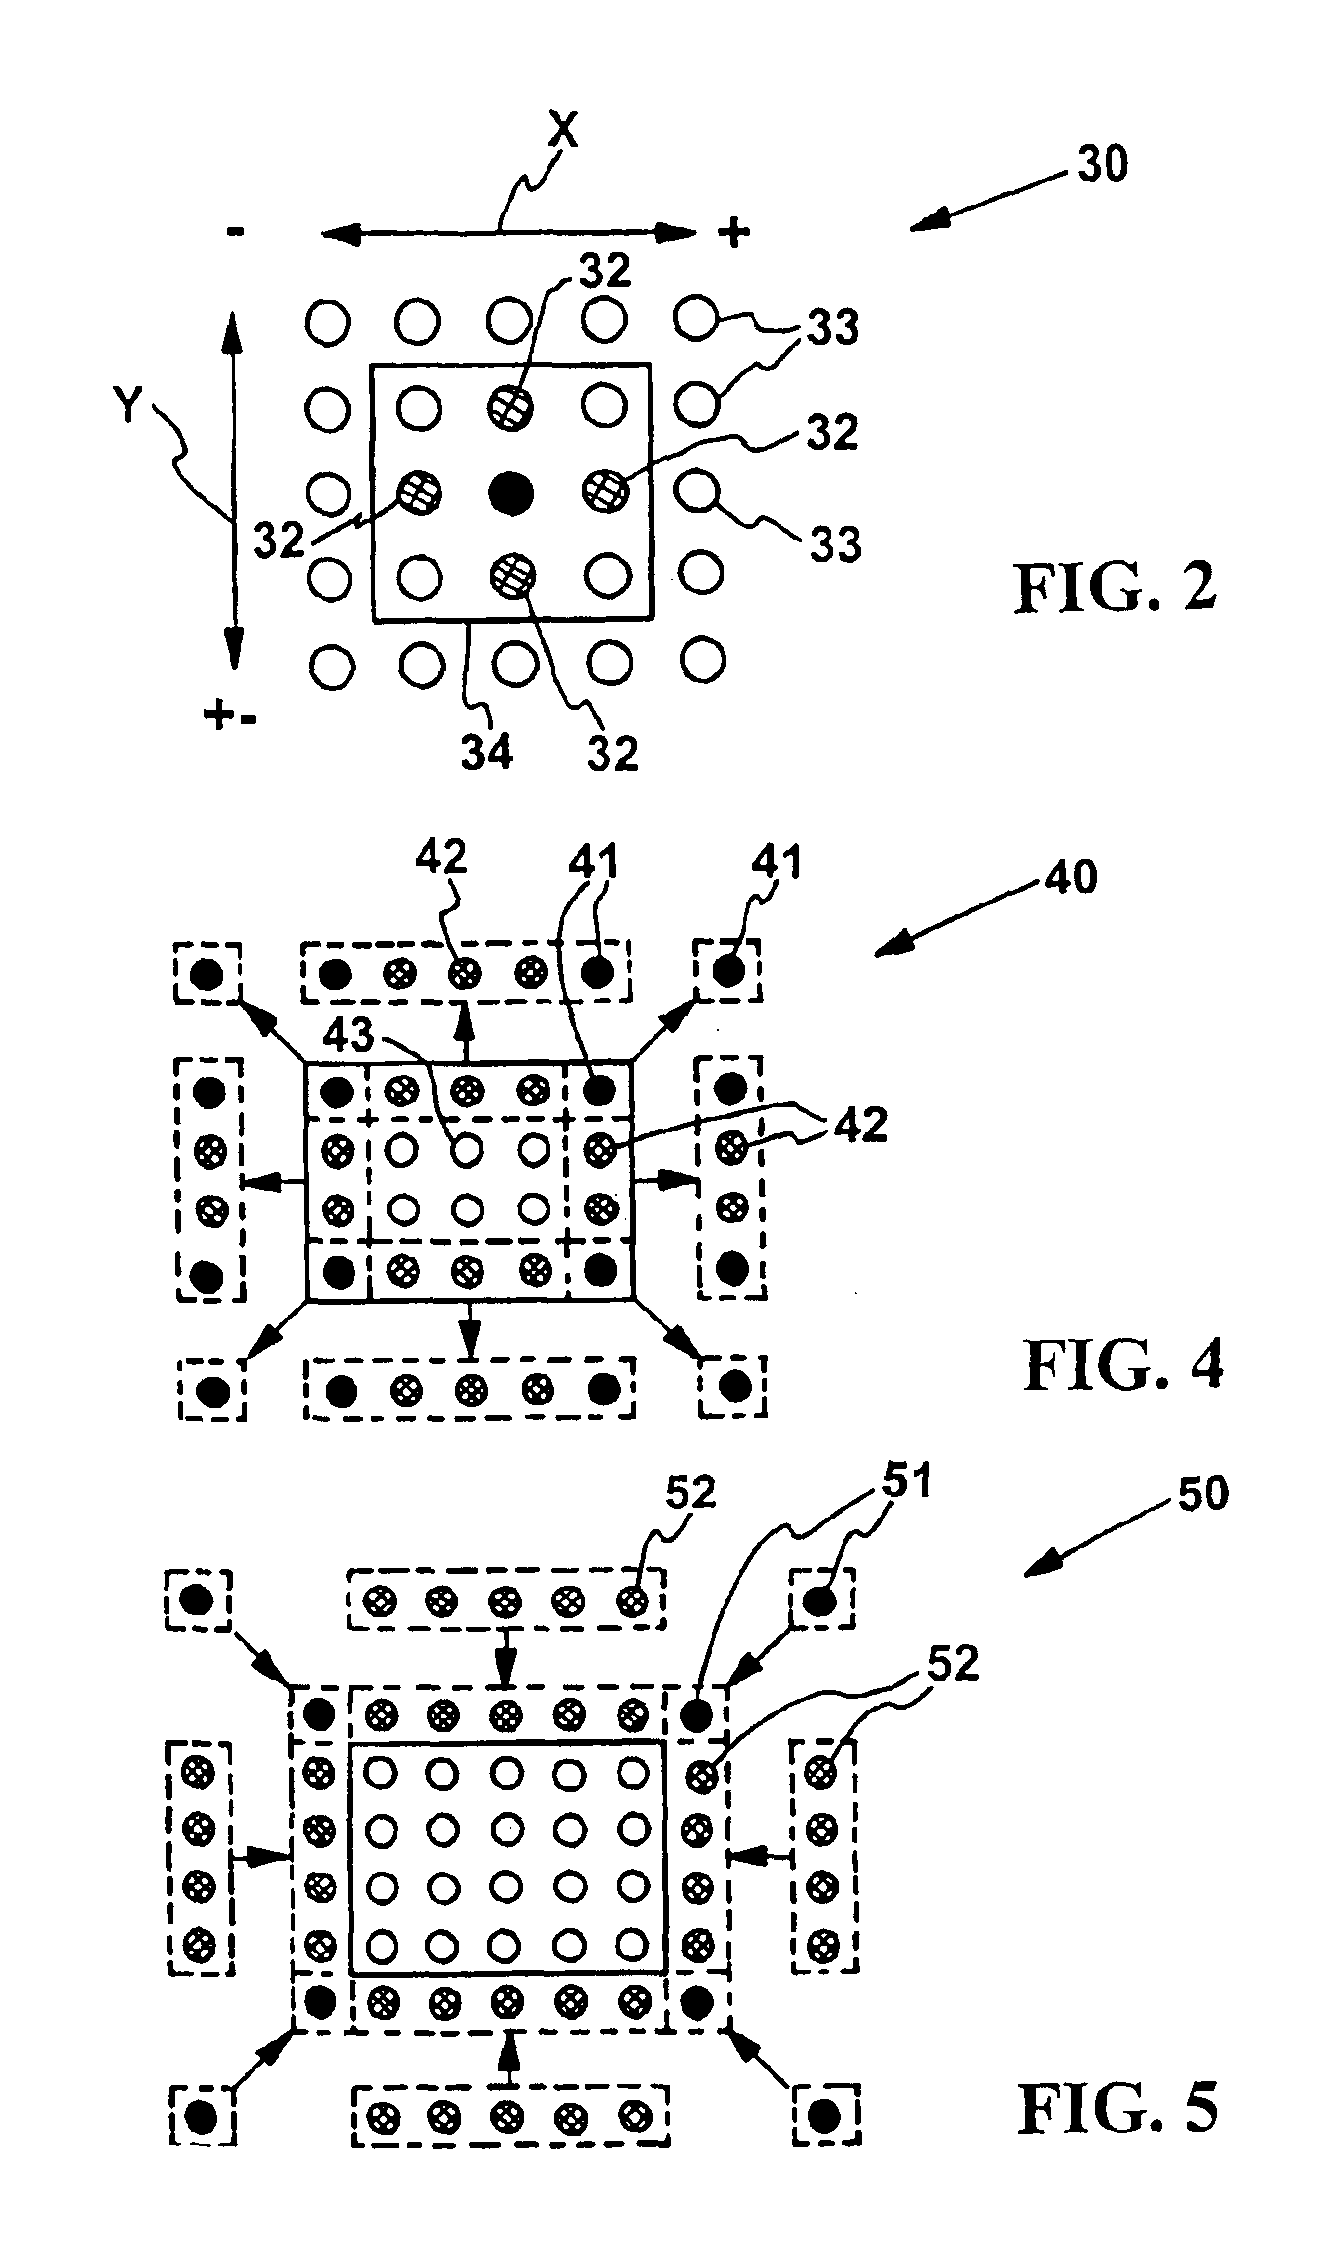 Parallel object-oriented, denoising system using wavelet multiresolution analysis